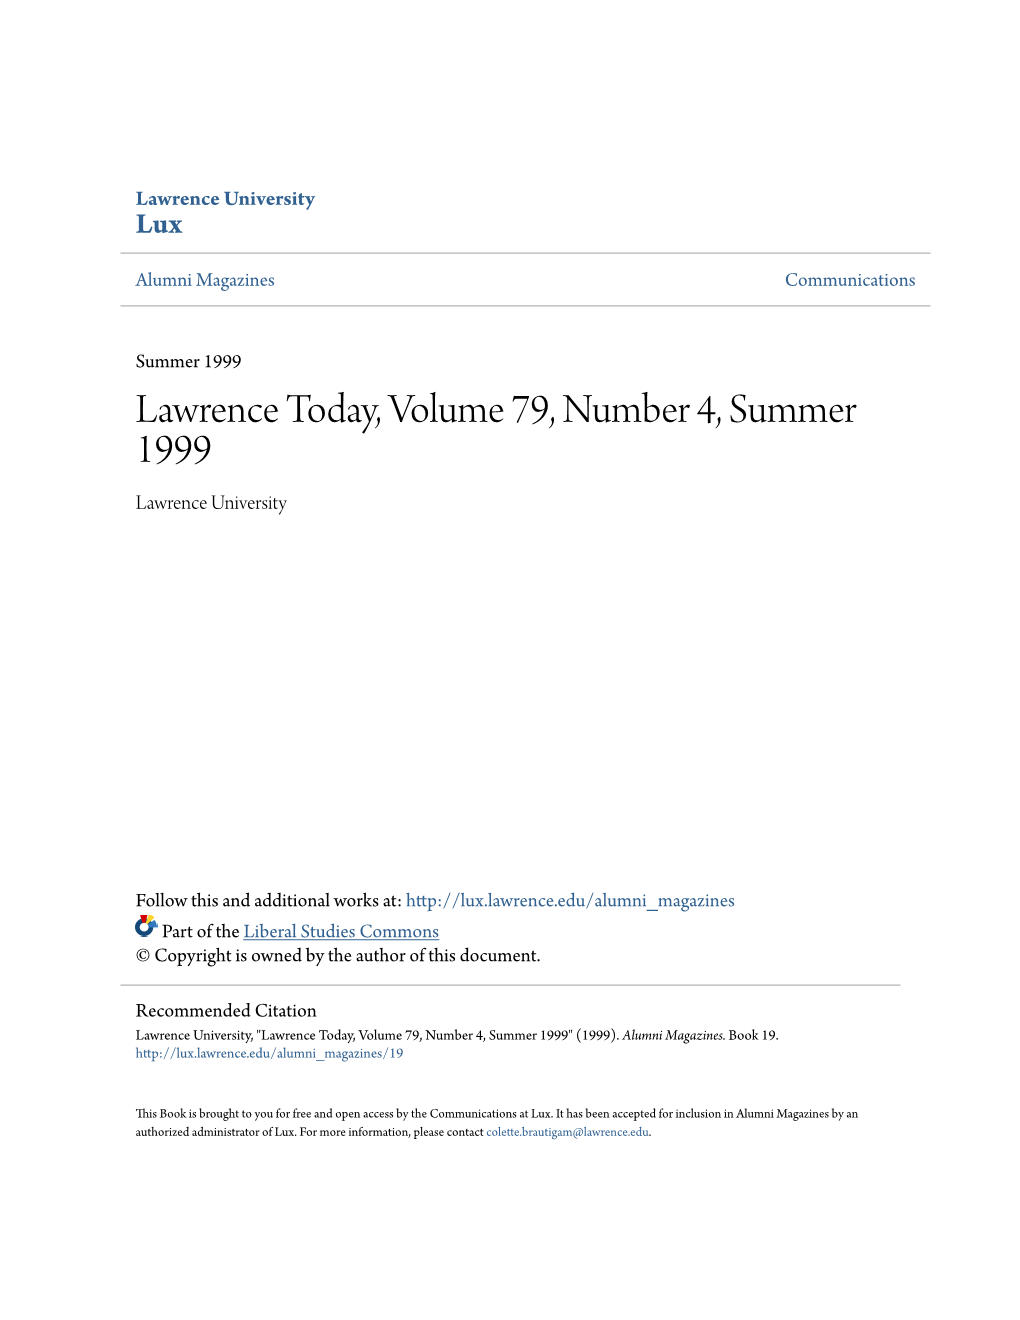 Lawrence Today, Volume 79, Number 4, Summer 1999 Lawrence University